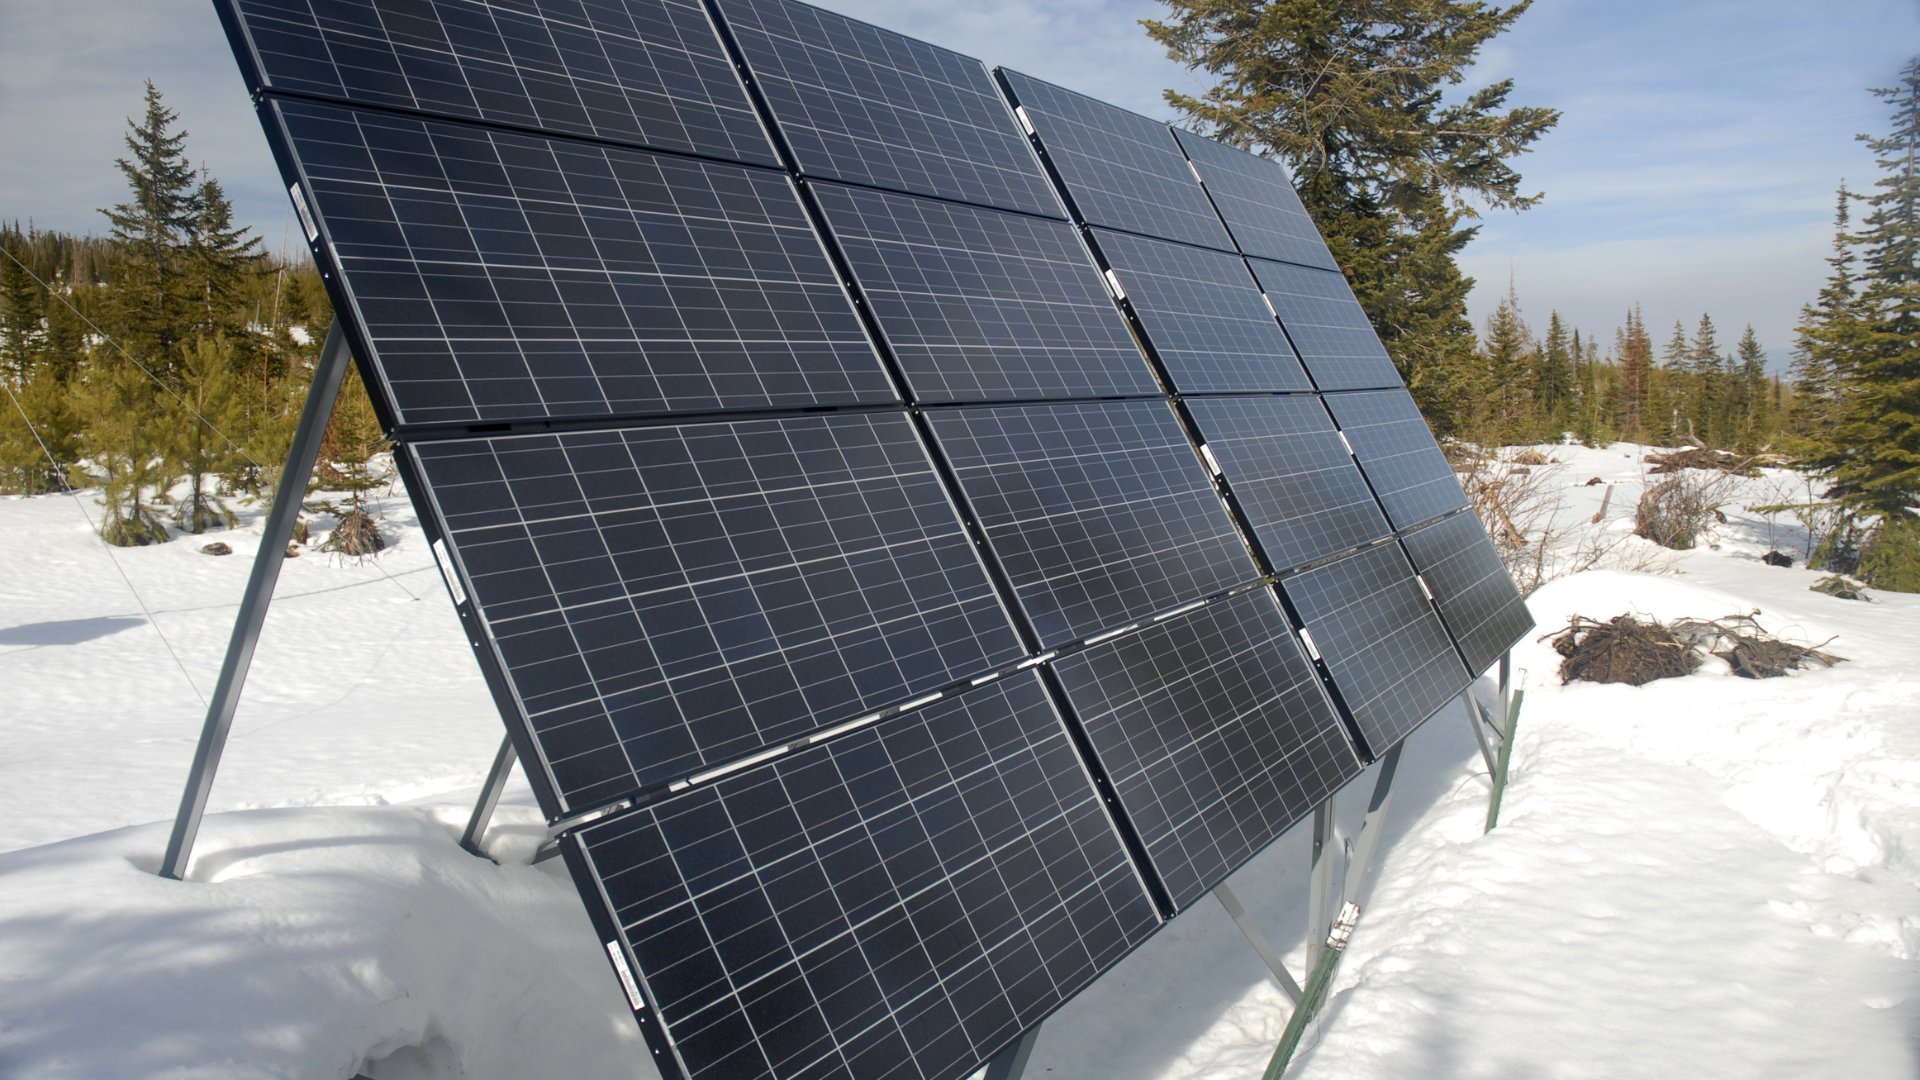 Solar panel in the snow during winter